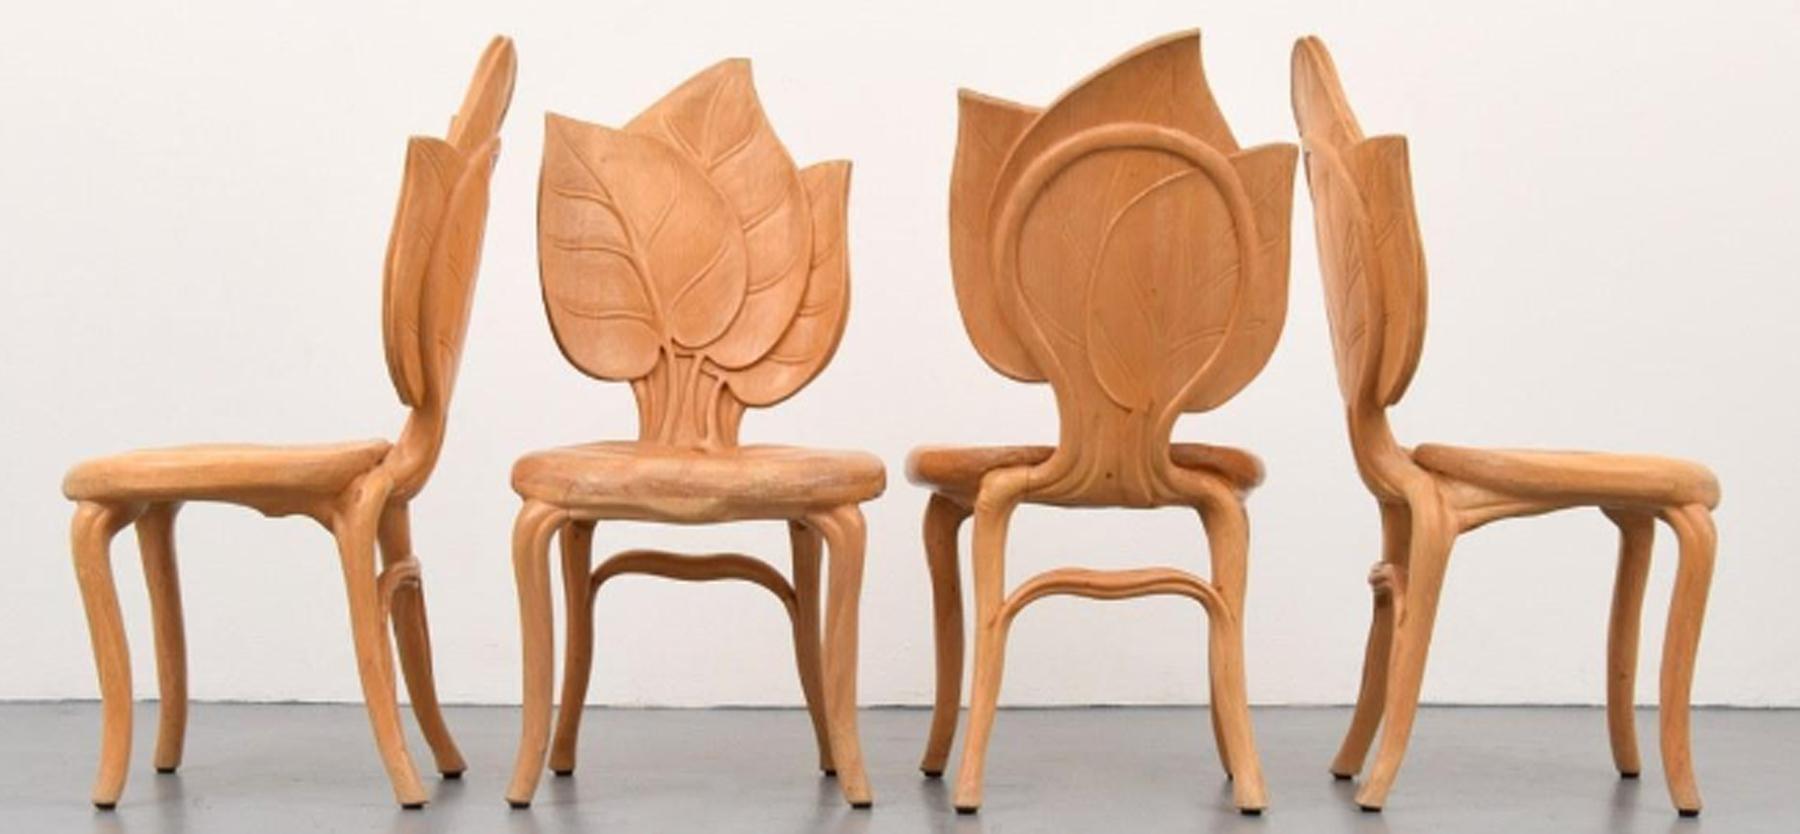 Vintage hand carved wooden leaf chairs by the Italian firm Bartolozzi & Maiolli.
Beautifully carved wood dining chairs not a large production run. Florence, Italy, circa 1970s. Set of 8 dining room chairs. In very good condition.